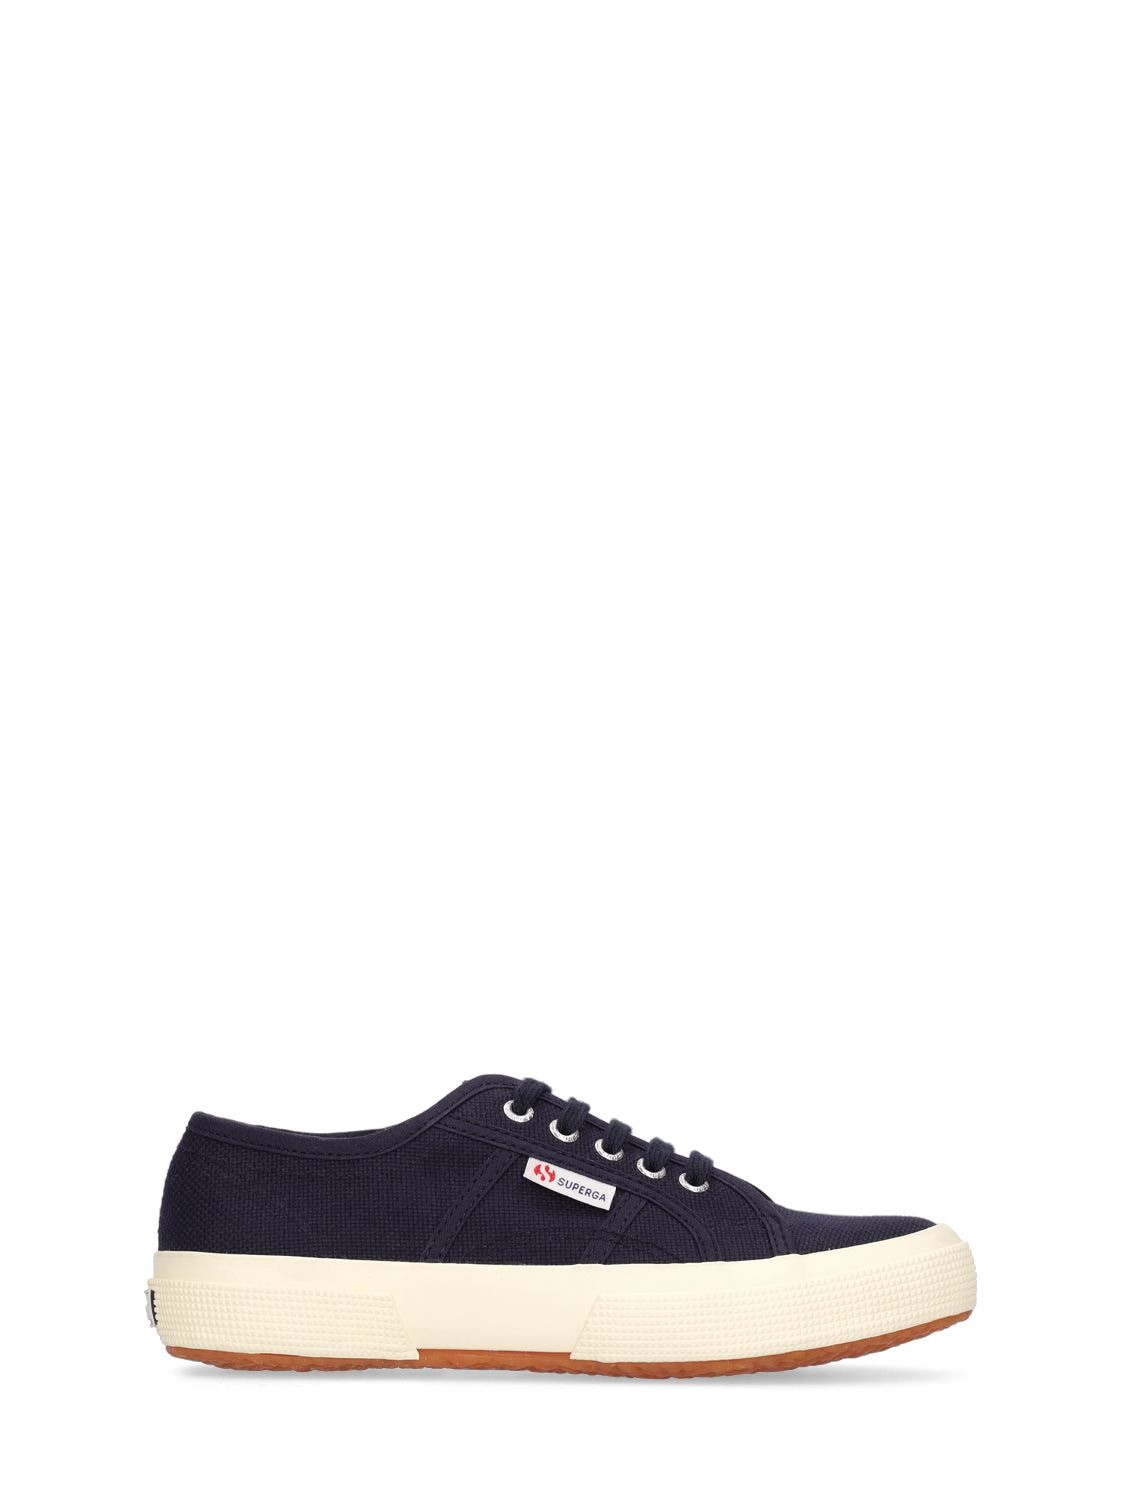 Superga Kids' 2750-jcot Classic Canvas Sneakers In Navy